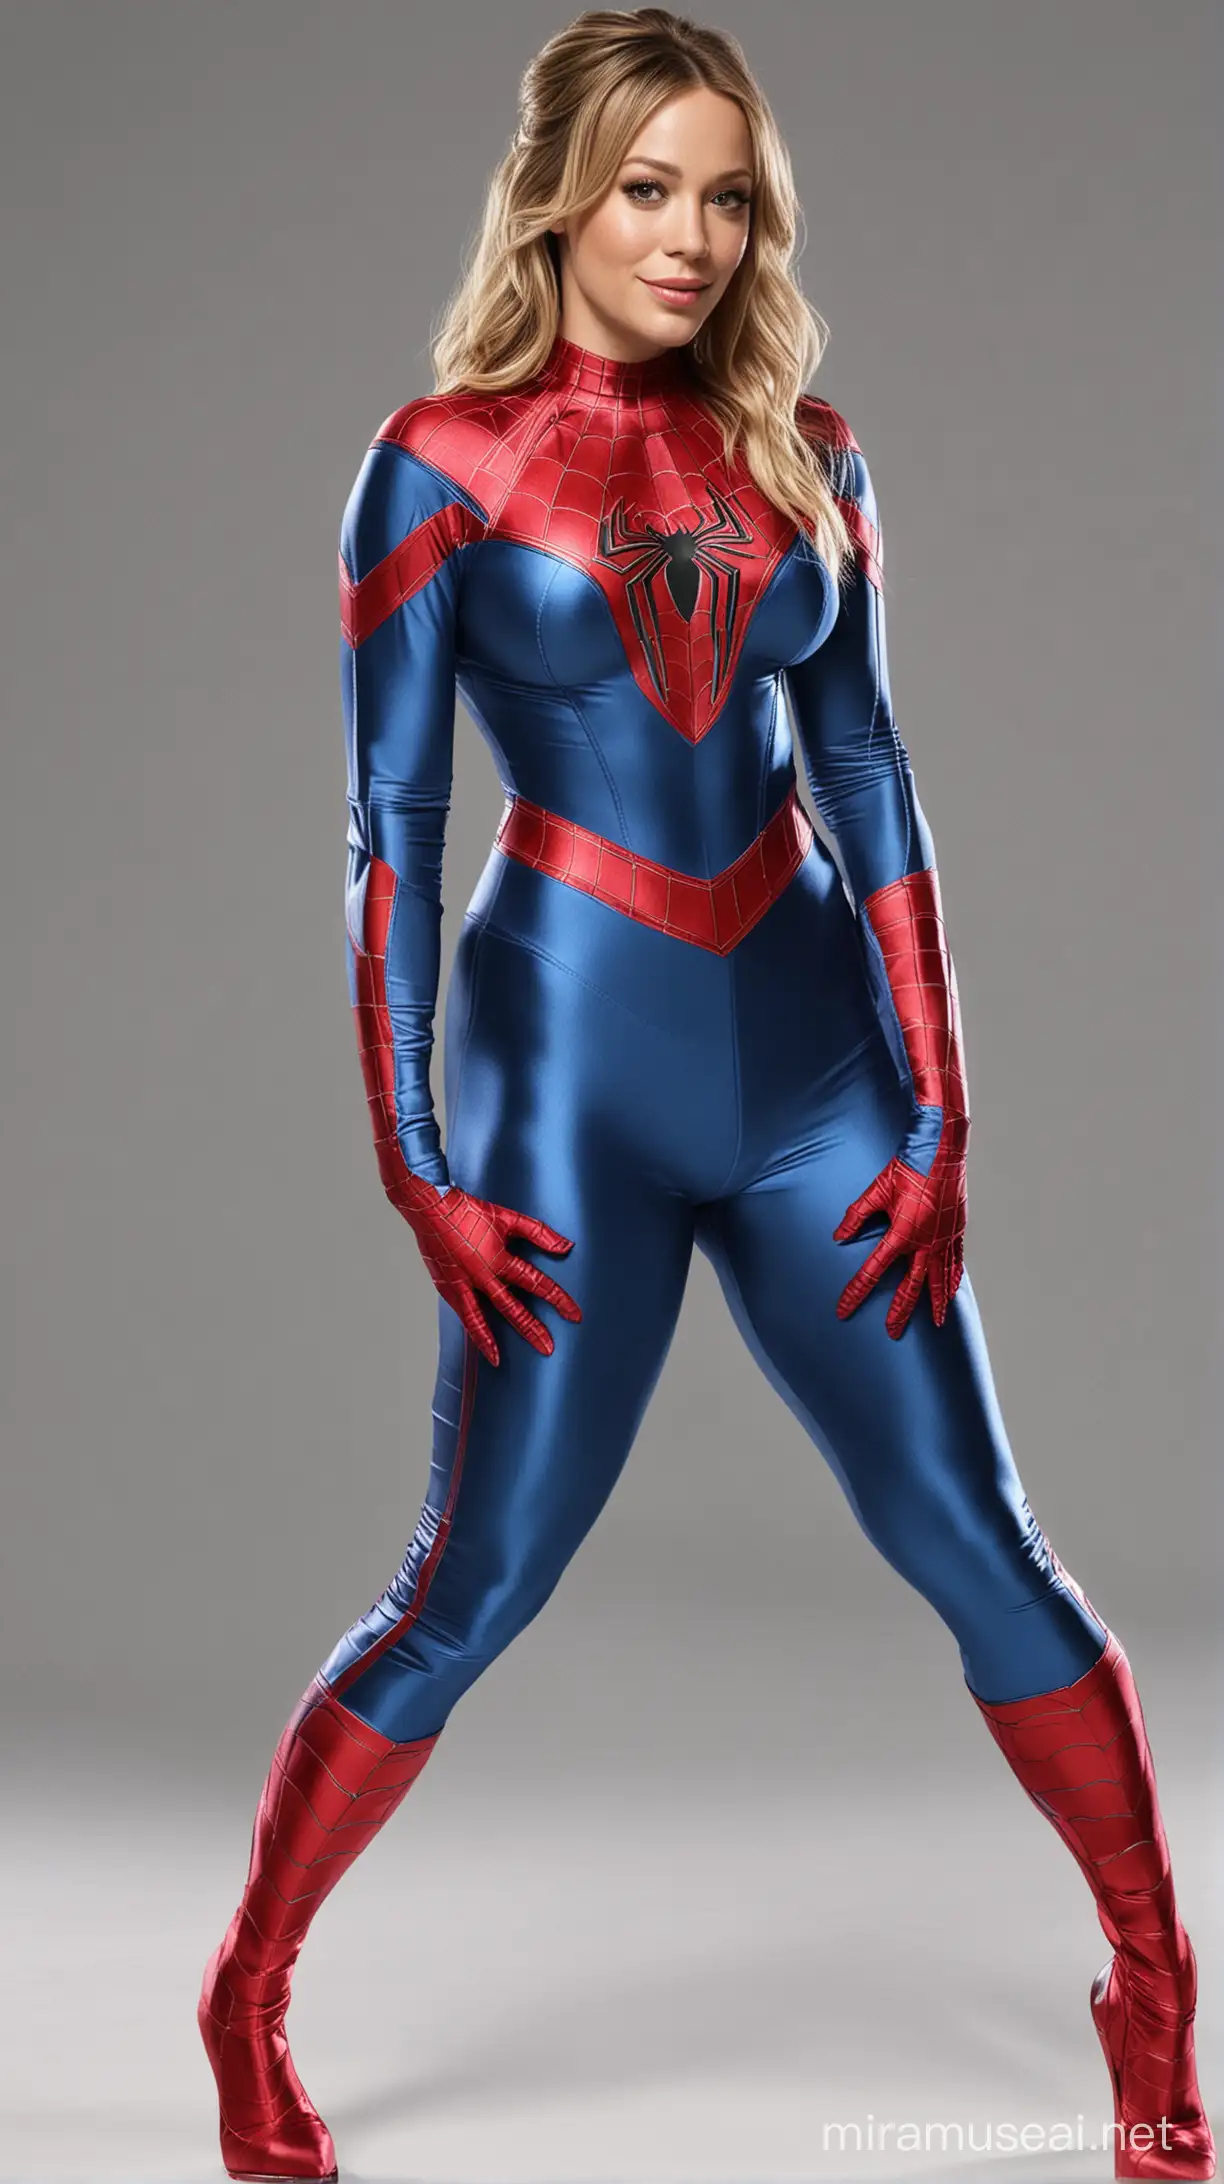 Hilary Duff Wearing Vibrant SpiderMan Satin Costume in Dynamic Stance